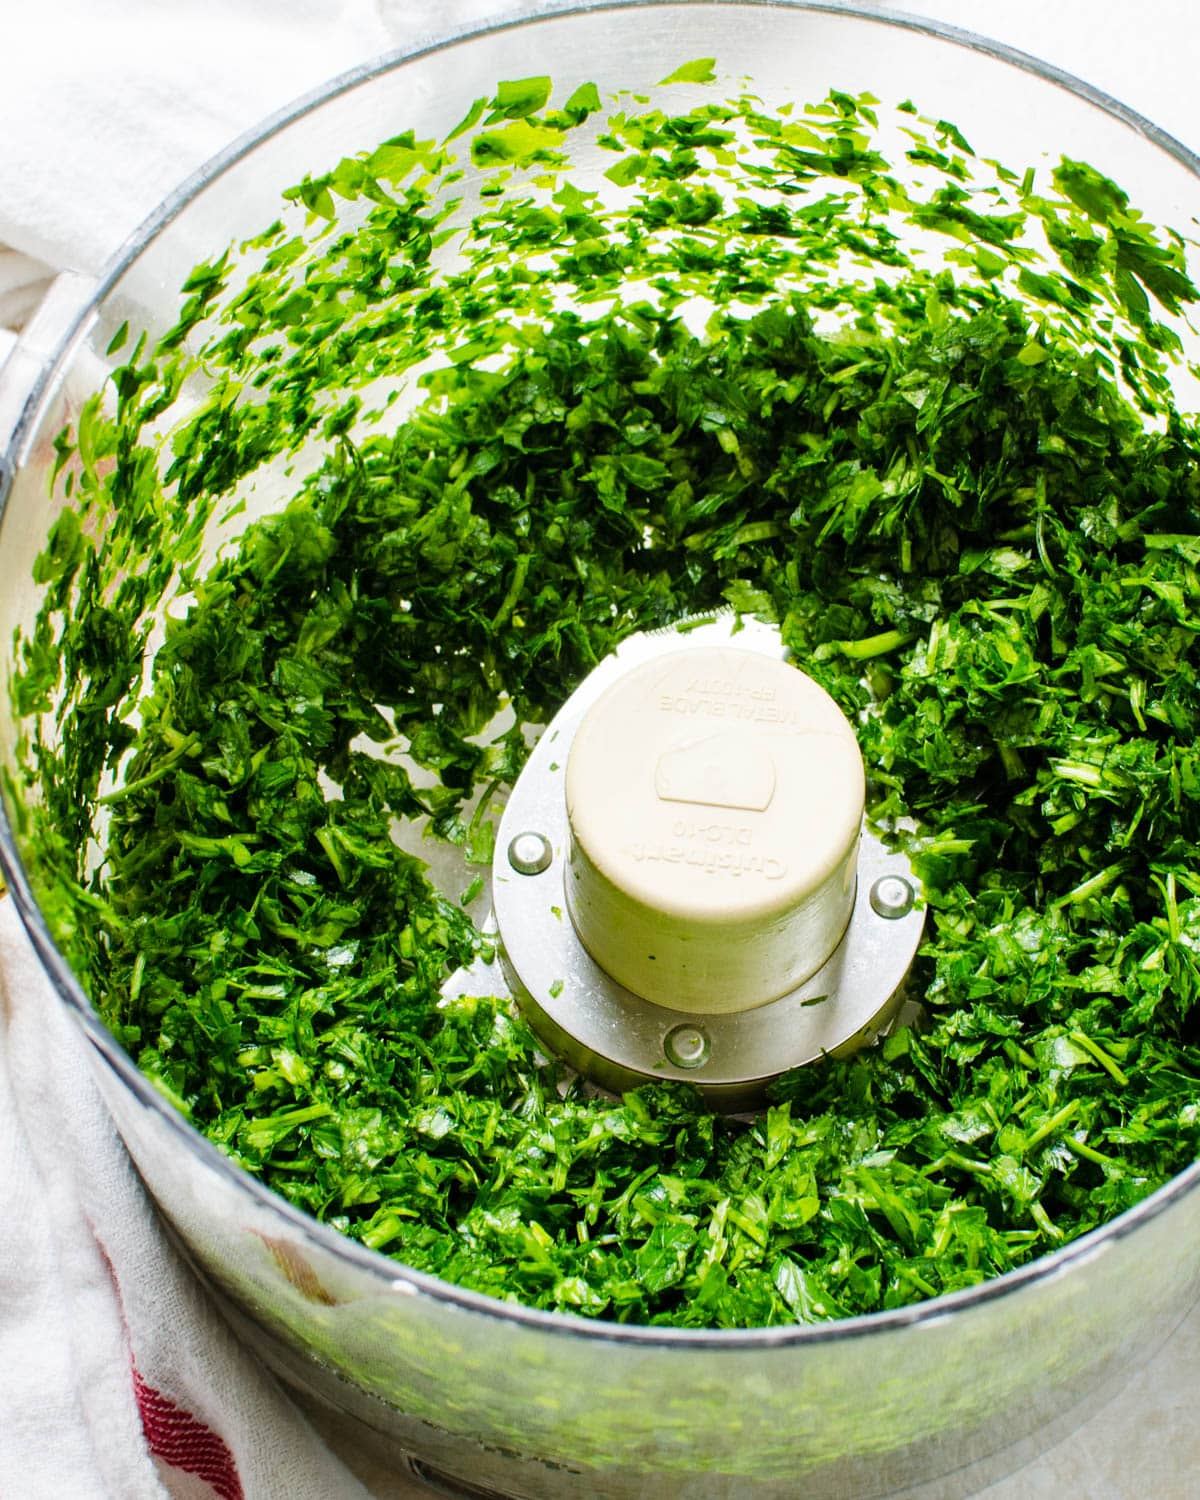 chopping the parsley and cilantro in a food processor.